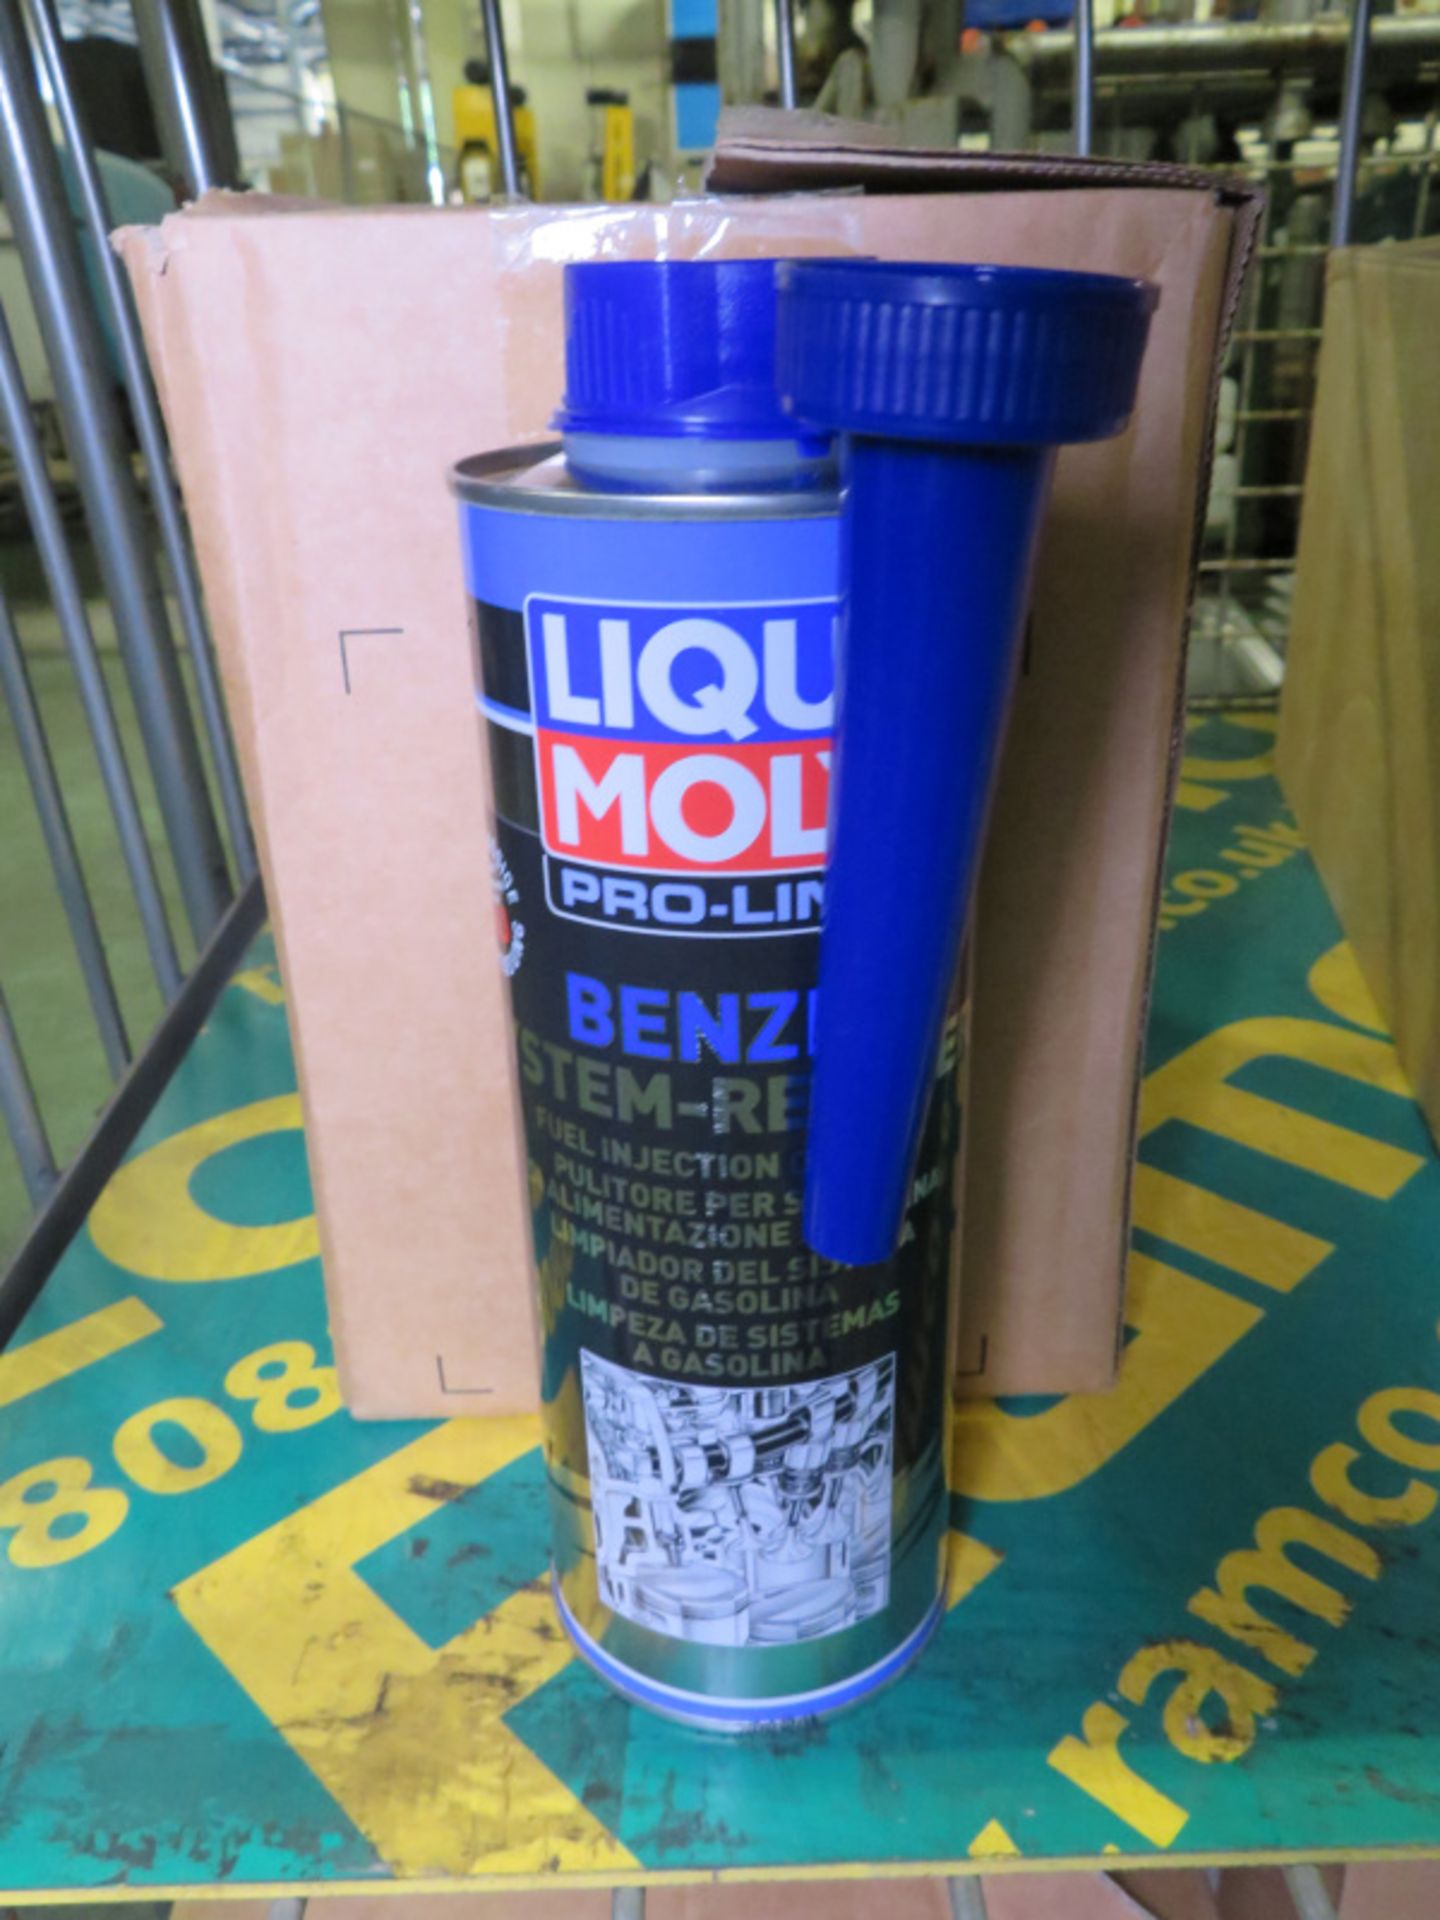 Liqui Moly fuel injection cleaner, Liqui Moly engine flush plus, Liqui Moly injection cleaner - Image 2 of 7